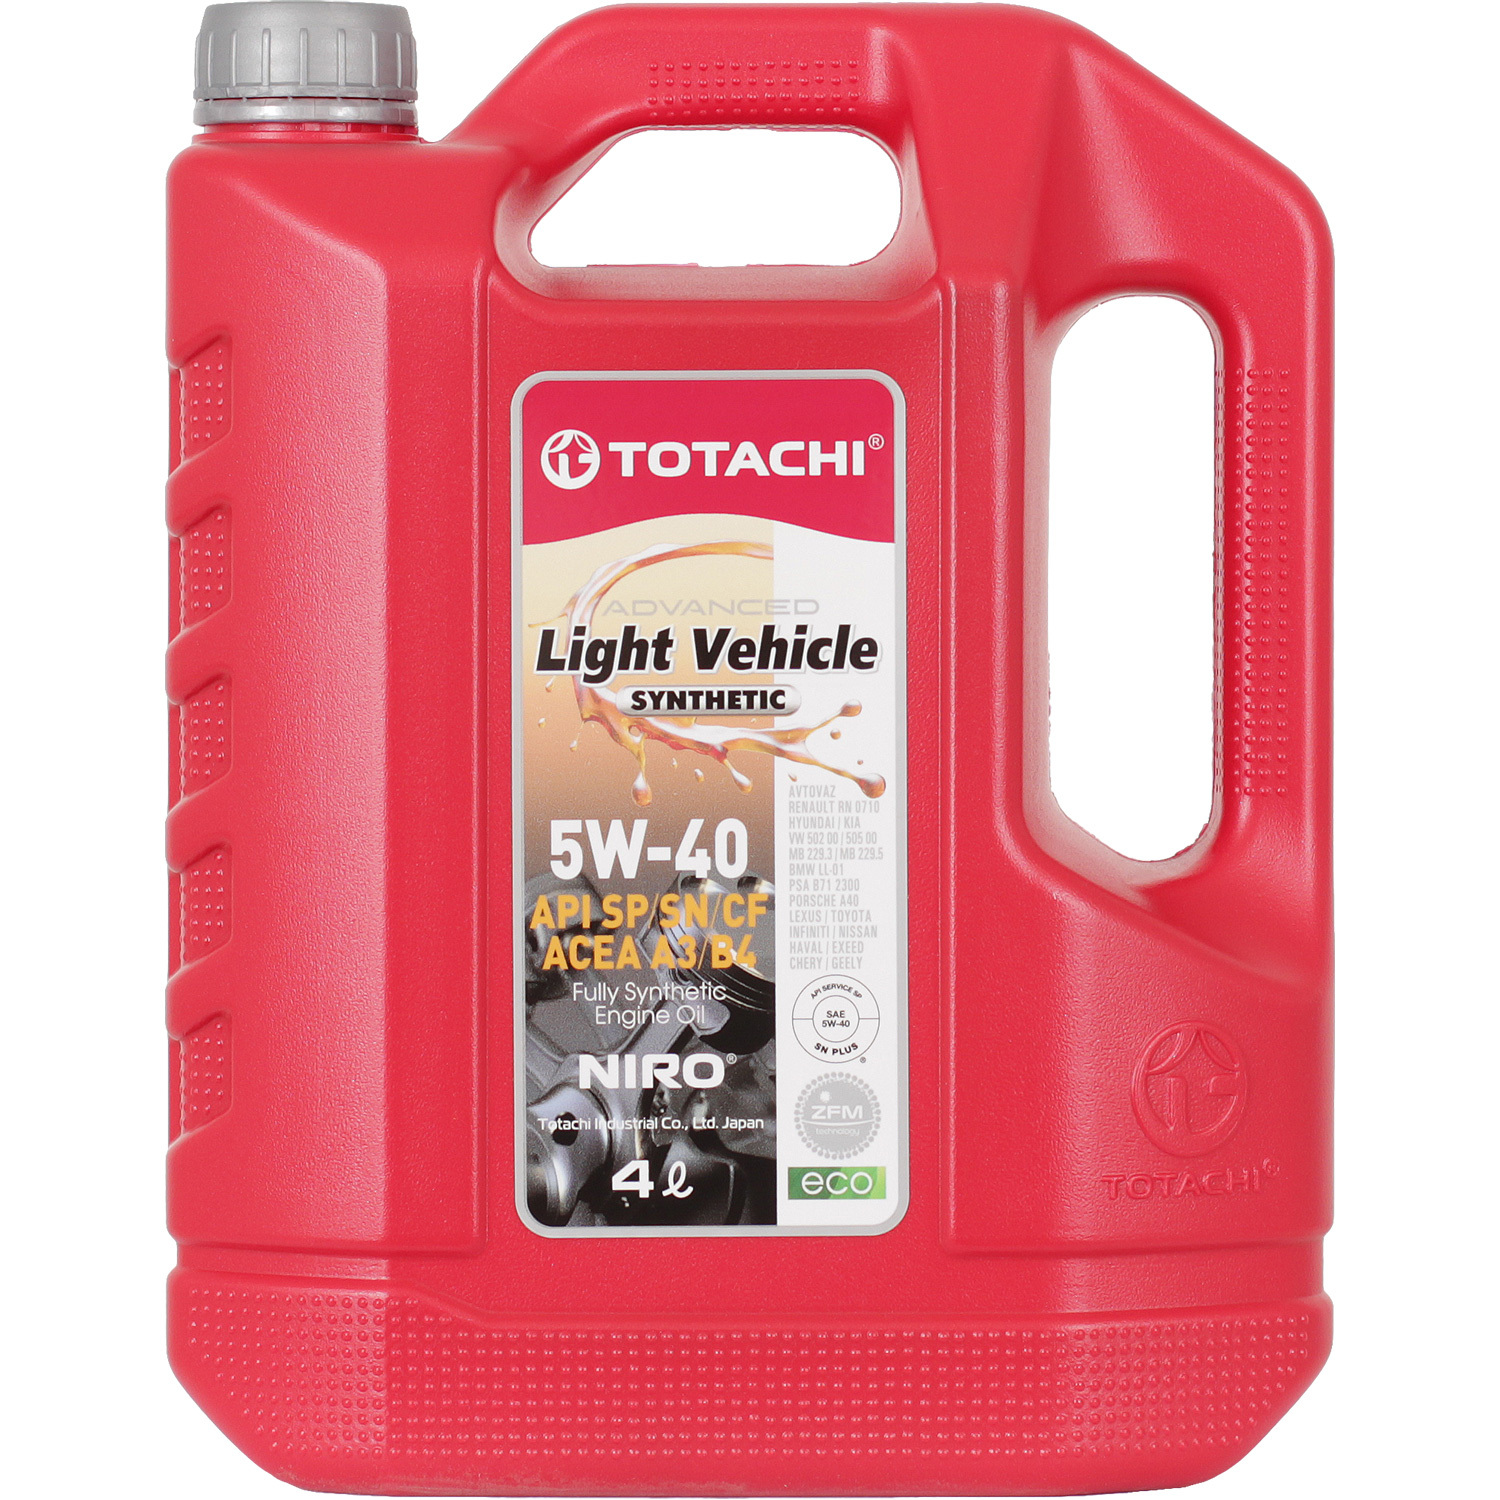 Totachi Моторное масло Totachi NIRO LV Synthetic 5W-40, 4 л масло моторное autobacs 5 40 synthetic синтетическое sp cf 1 л a00032431